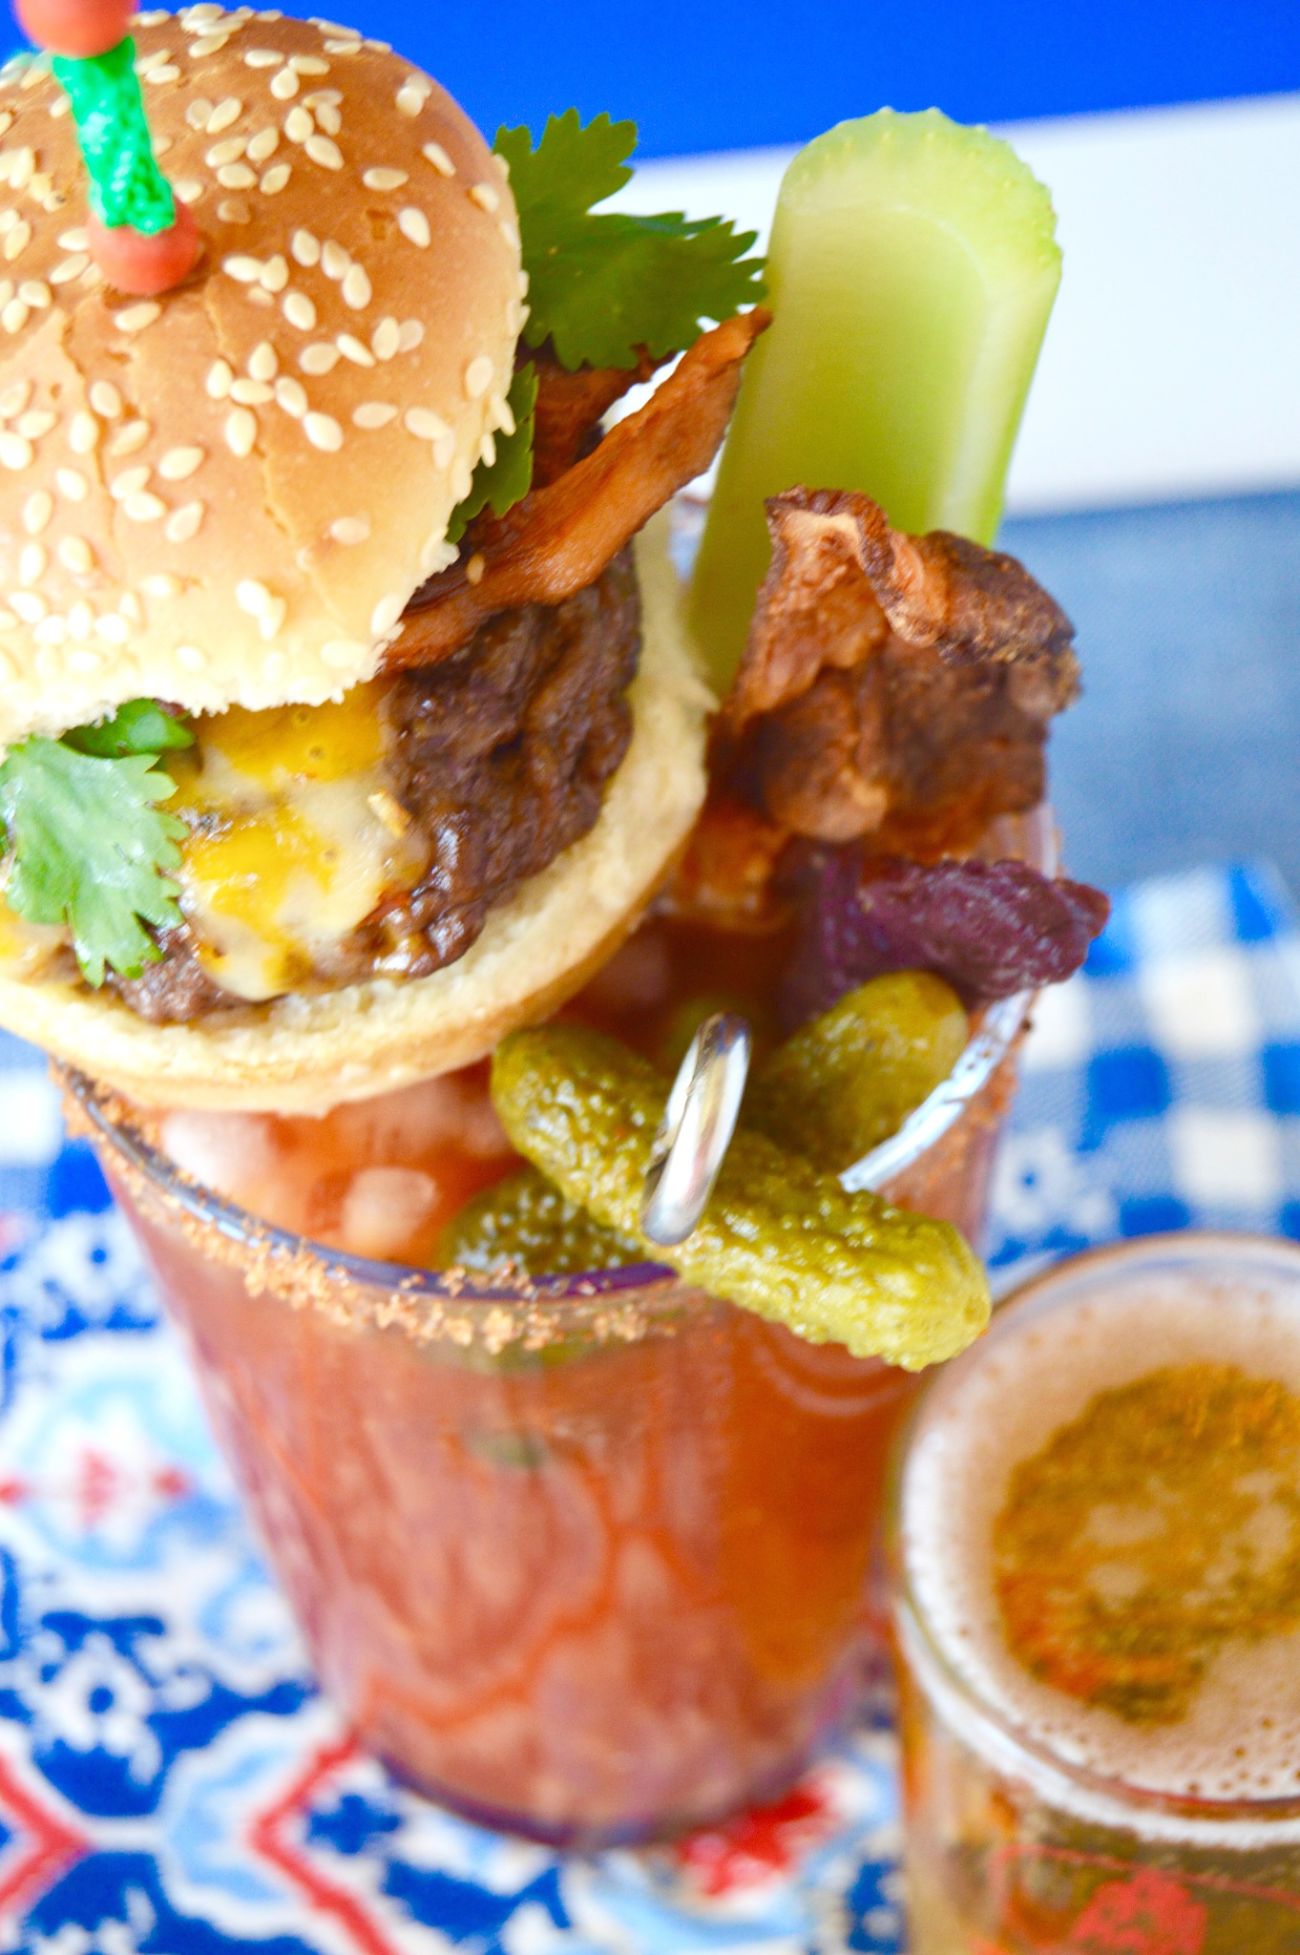 This Loaded Bloody Mary Cocktail is a full meal! Spicy Horseradish compliments the tangy tomato base and its topped with all the foods you want to eat when drinking a Bloody Mary, a burger, beef stick, olives, chunks of cheese and a Celery Stalk! Perfect for a brunch or watching a game!